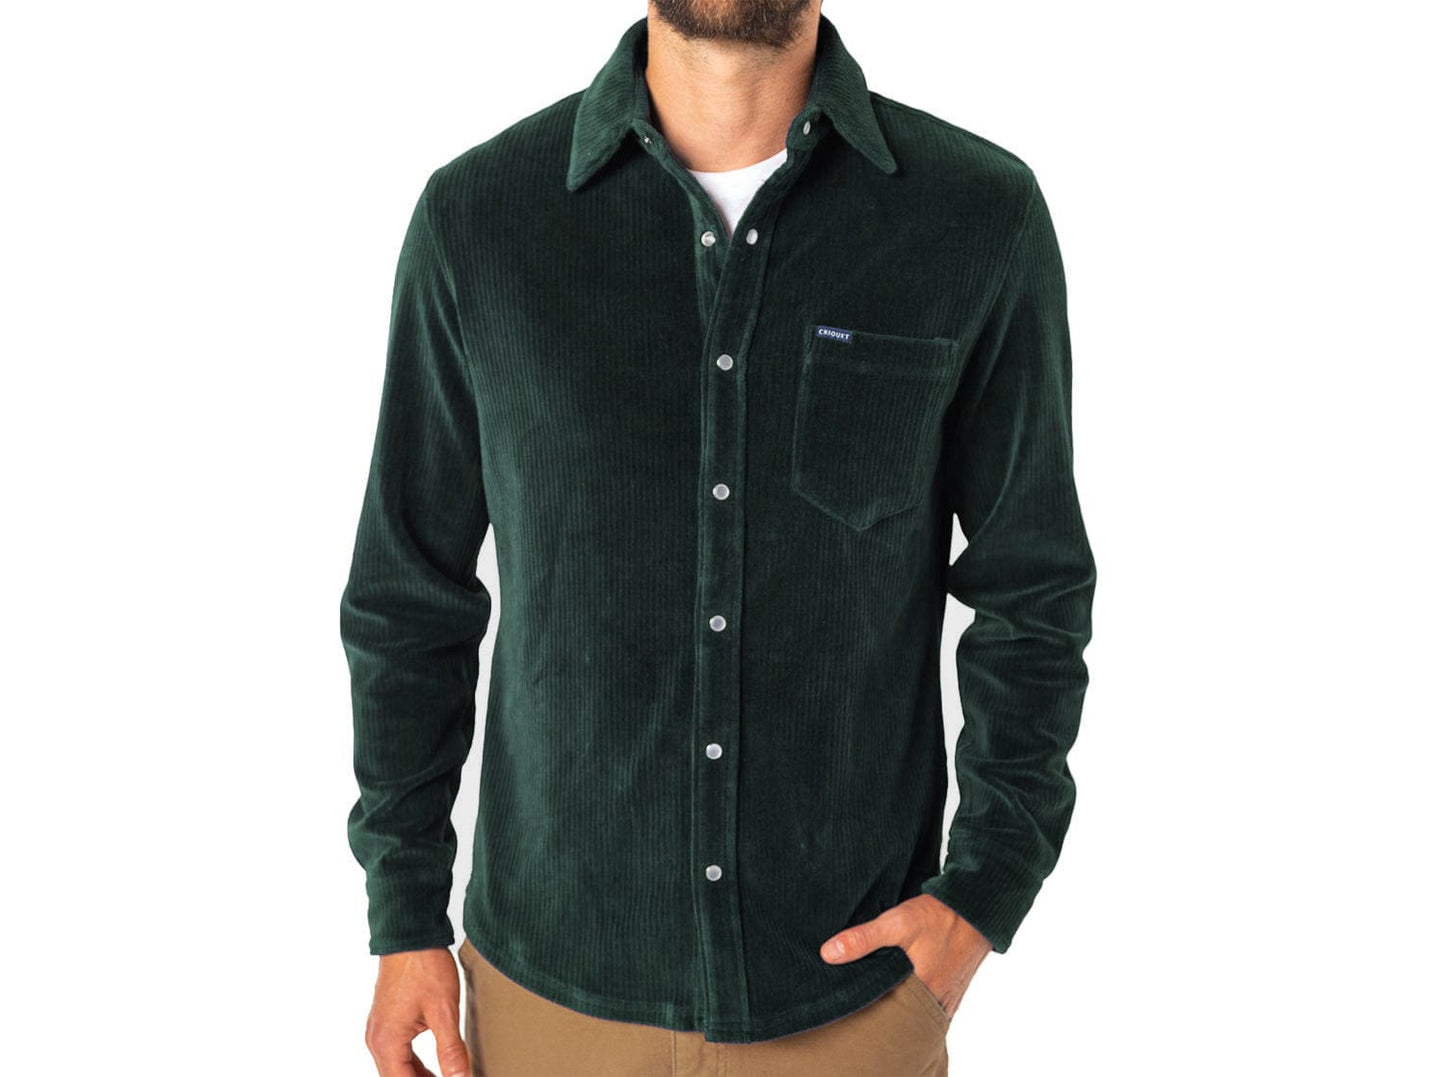 The Velour Pearl Snap - Emerald